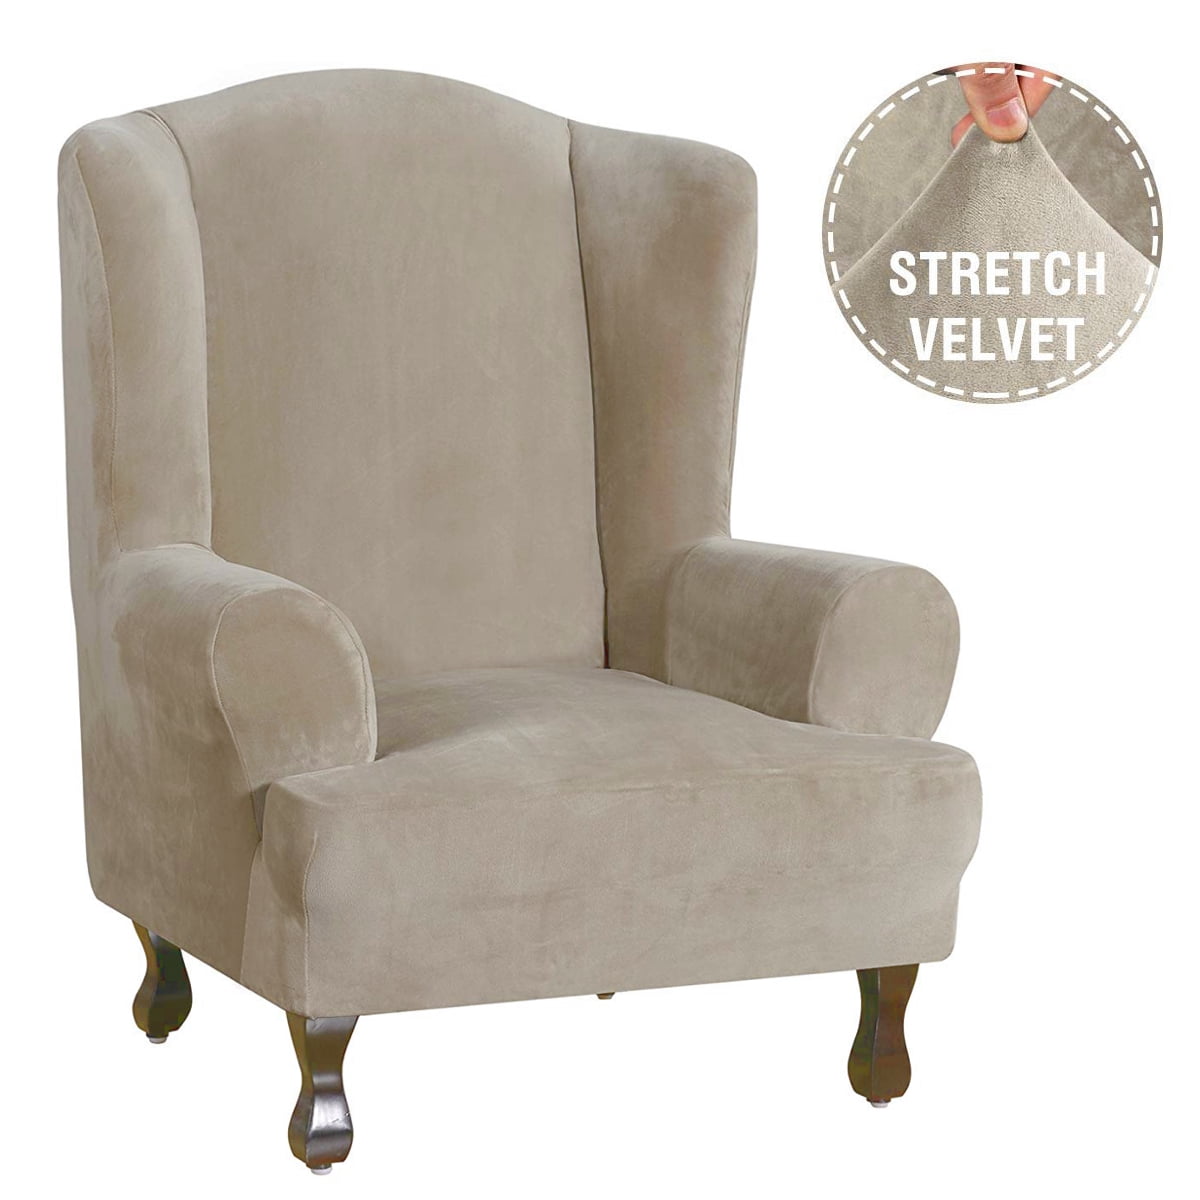 Details about   Stretch Wing Chair Slipcover Wingback Armchair Chair Slipcovers Sofa Covers 